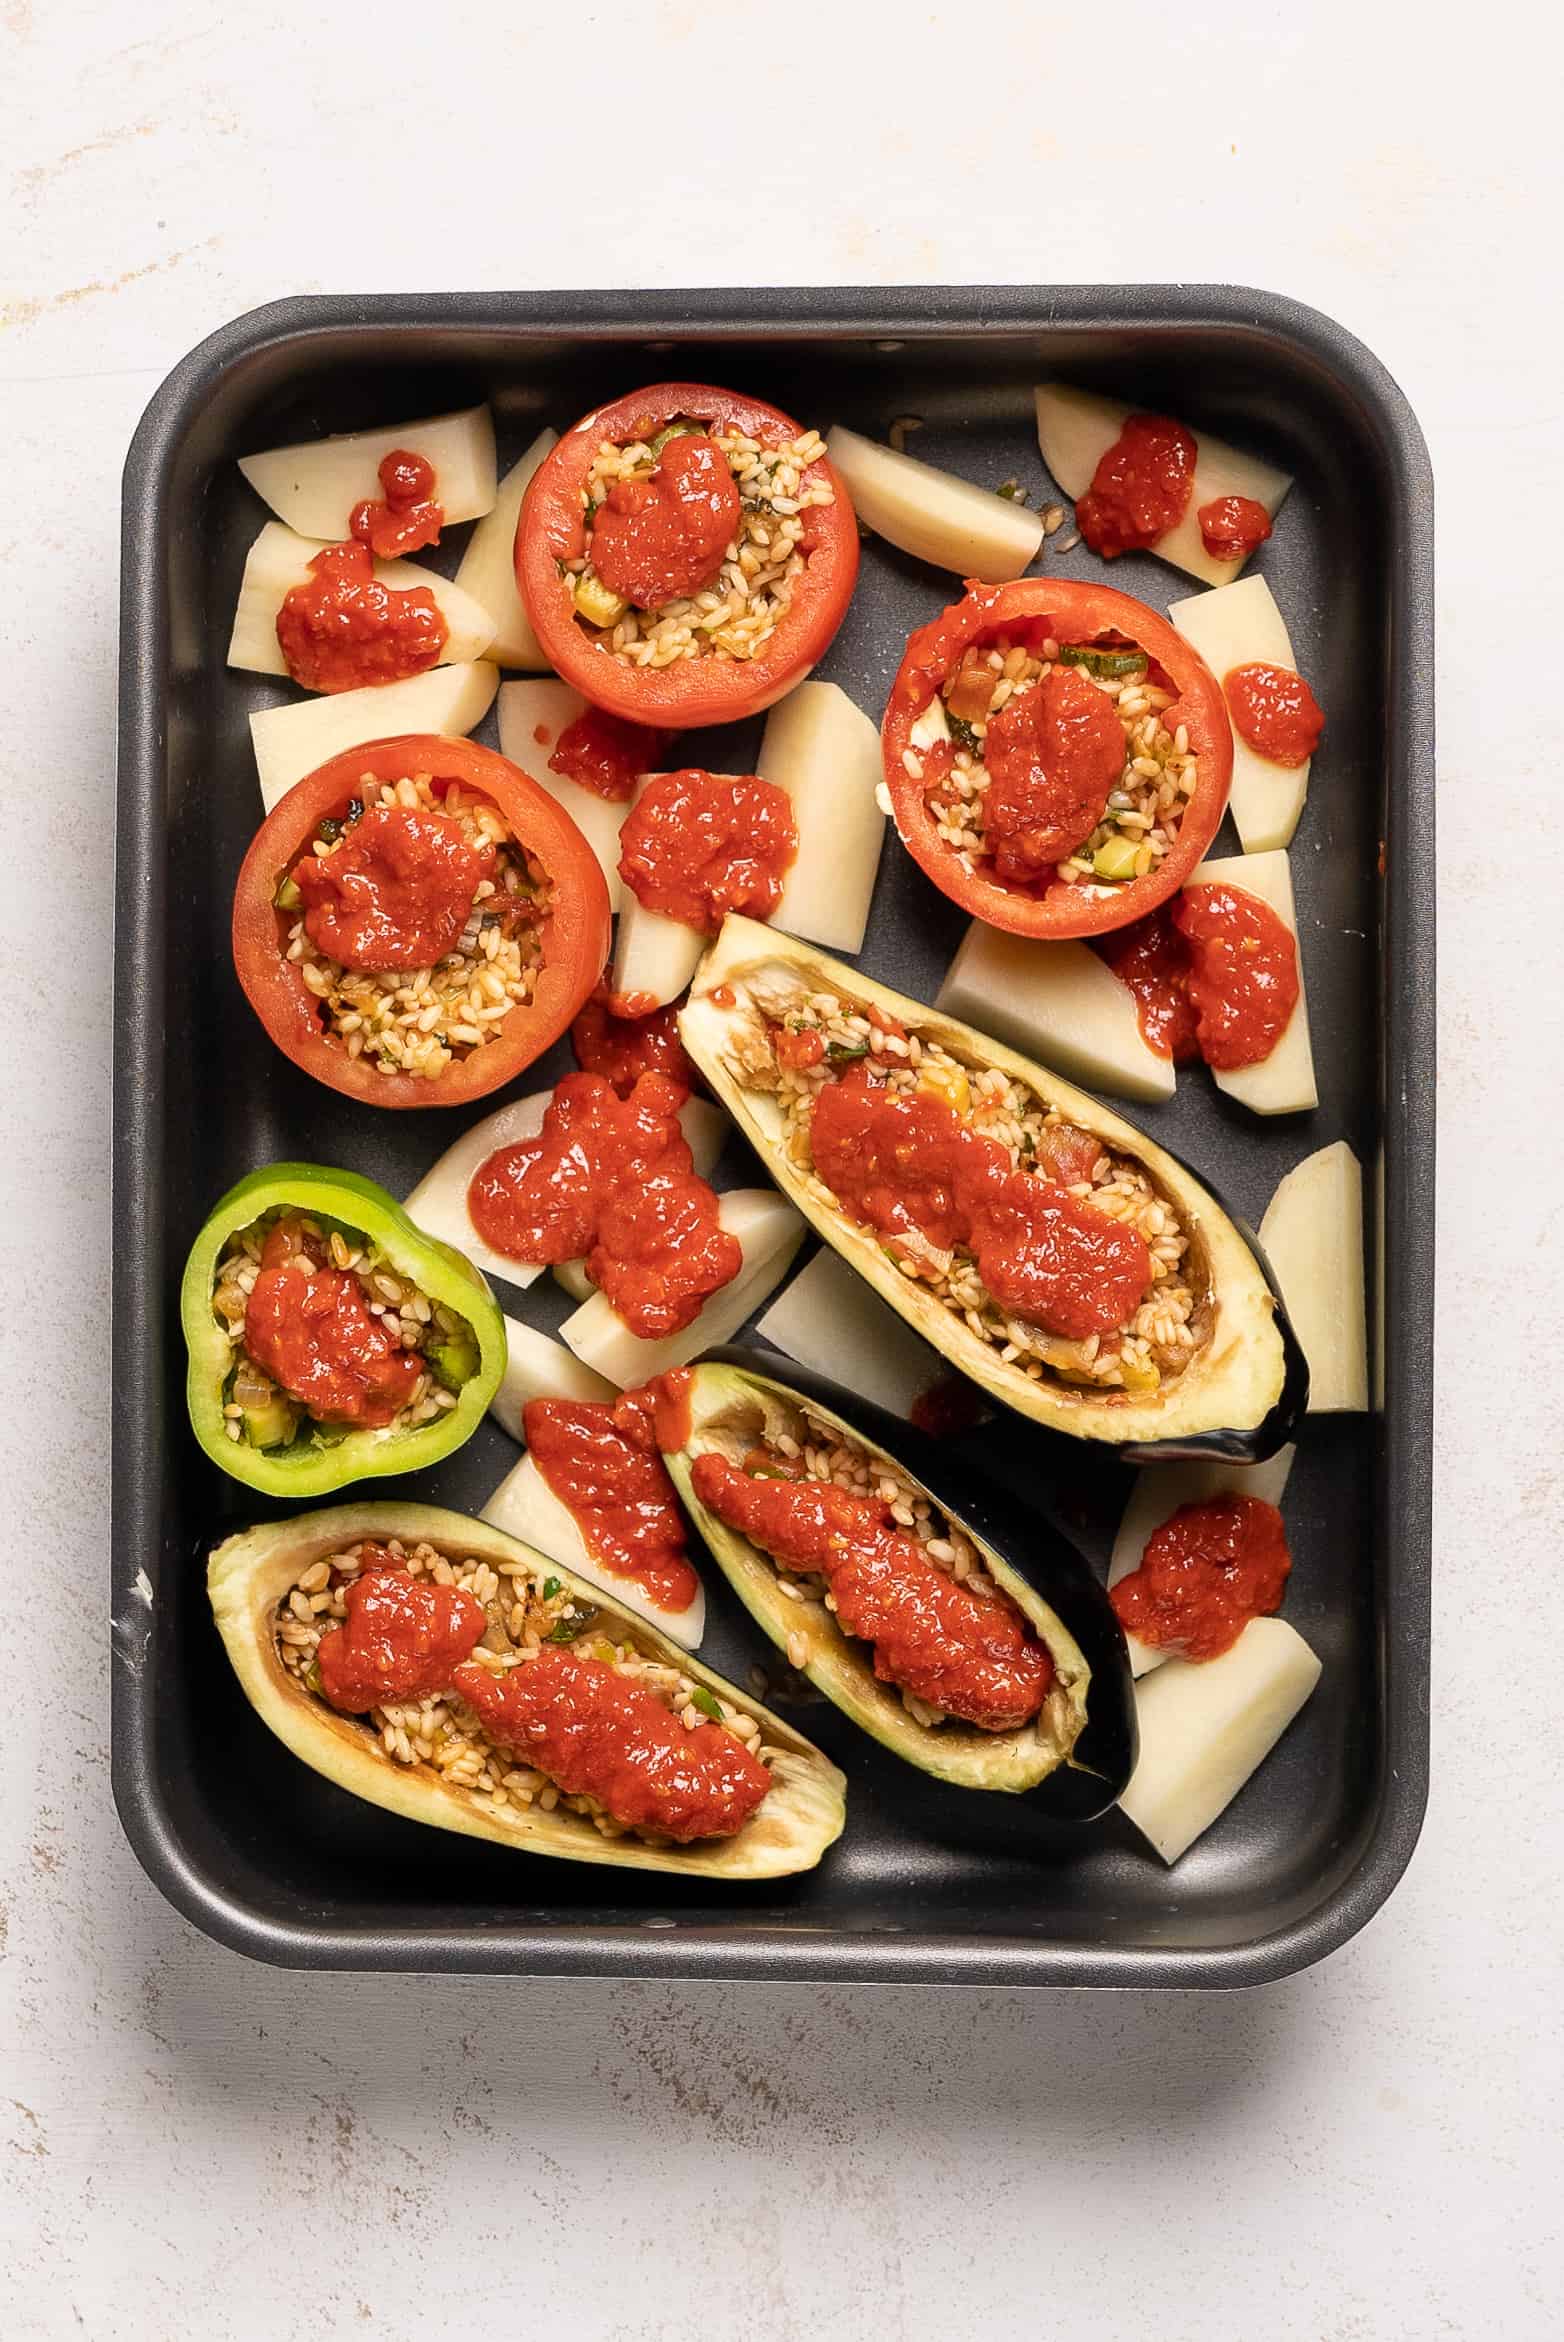 Gemista recipe (Greek Stuffed Tomatoes and Peppers with rice) - assembled